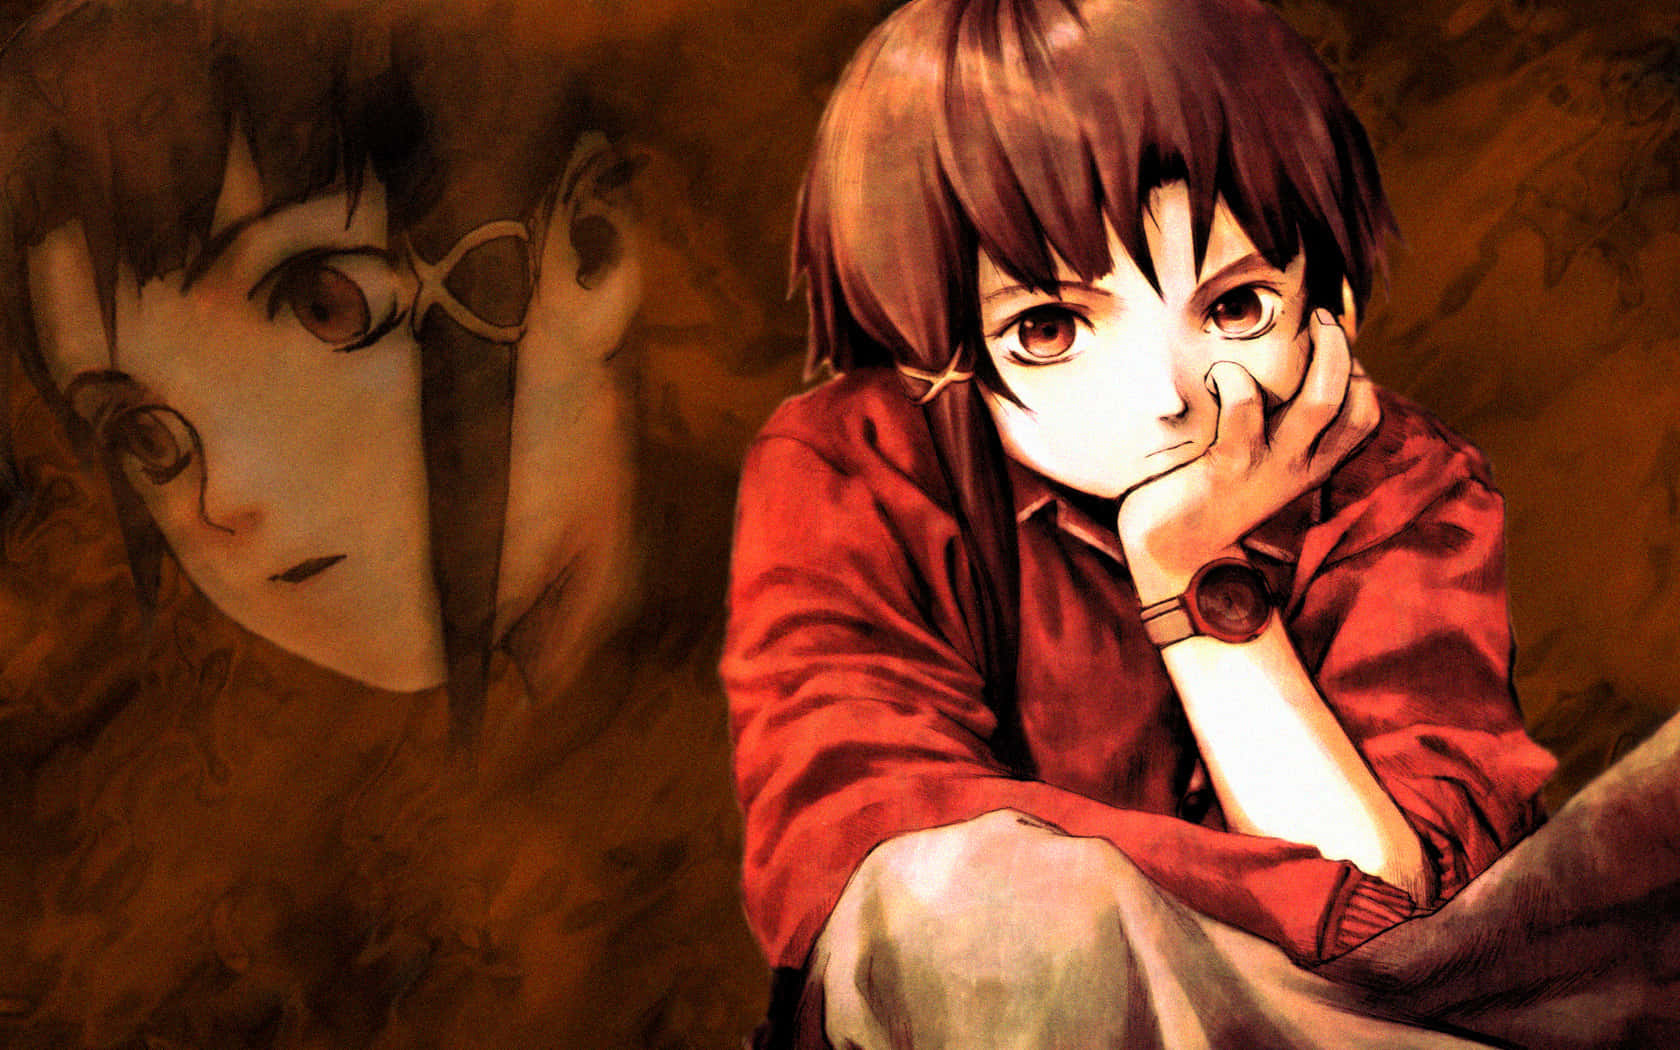 “exploring The Digital World With Serial Experiments Lain”